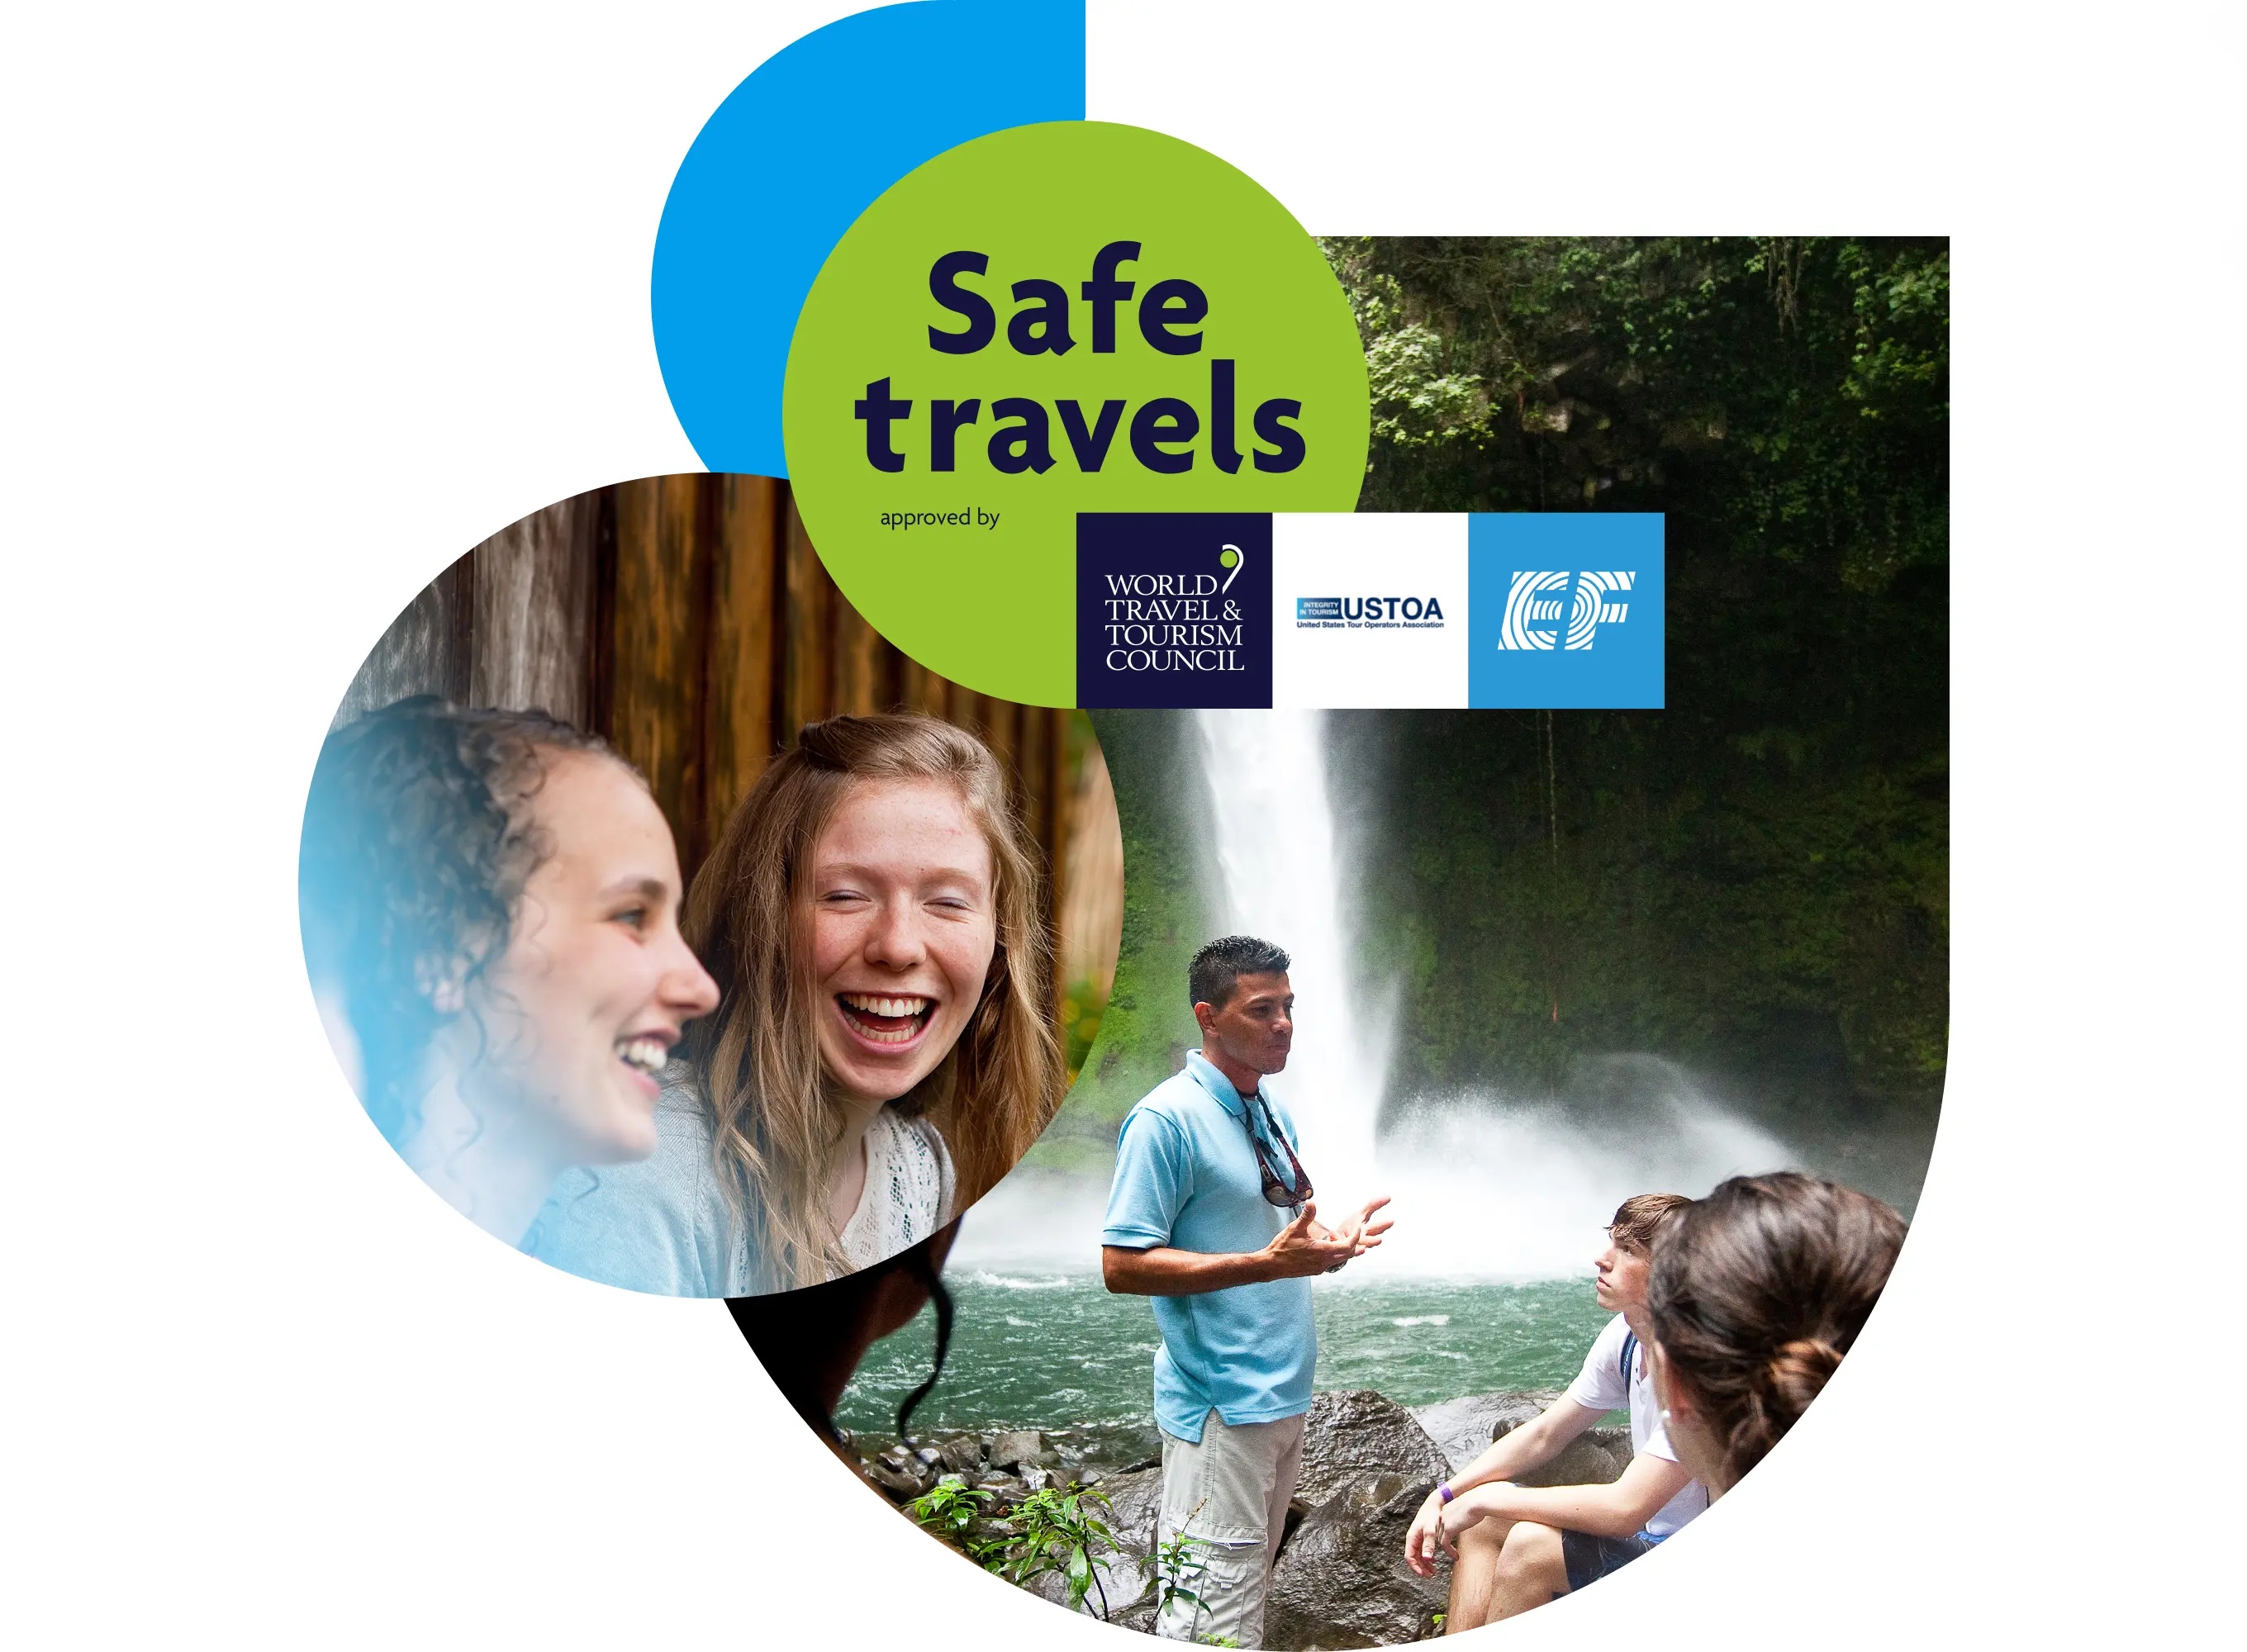 students in front of waterfall with safety partner logos